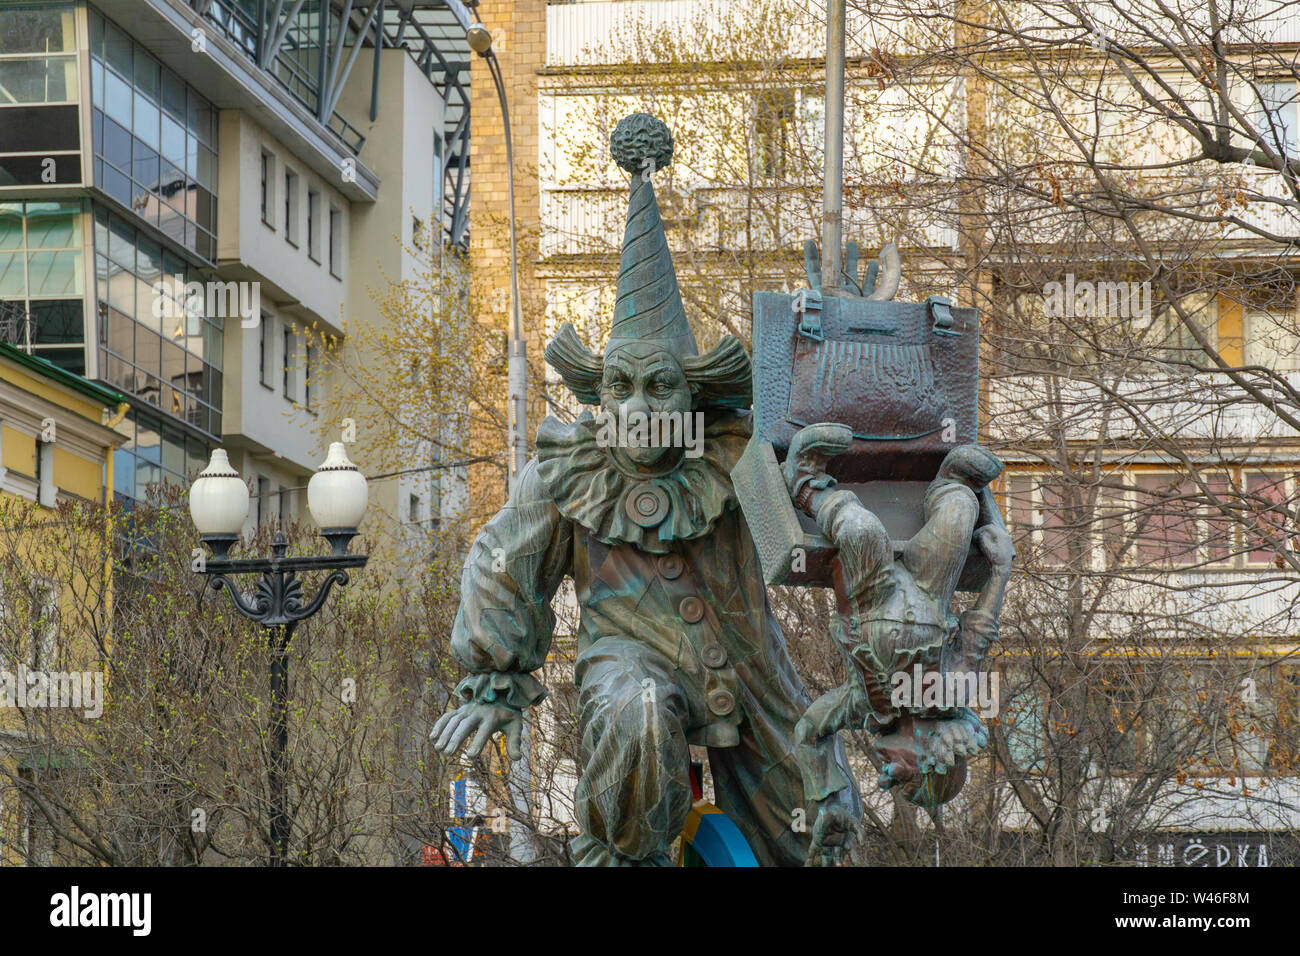 Moscow, Russia - April 29, 2019: A bronze statue of clown at Clowns Square on Tsvetnoy Boulevard in Moscow Stock Photo